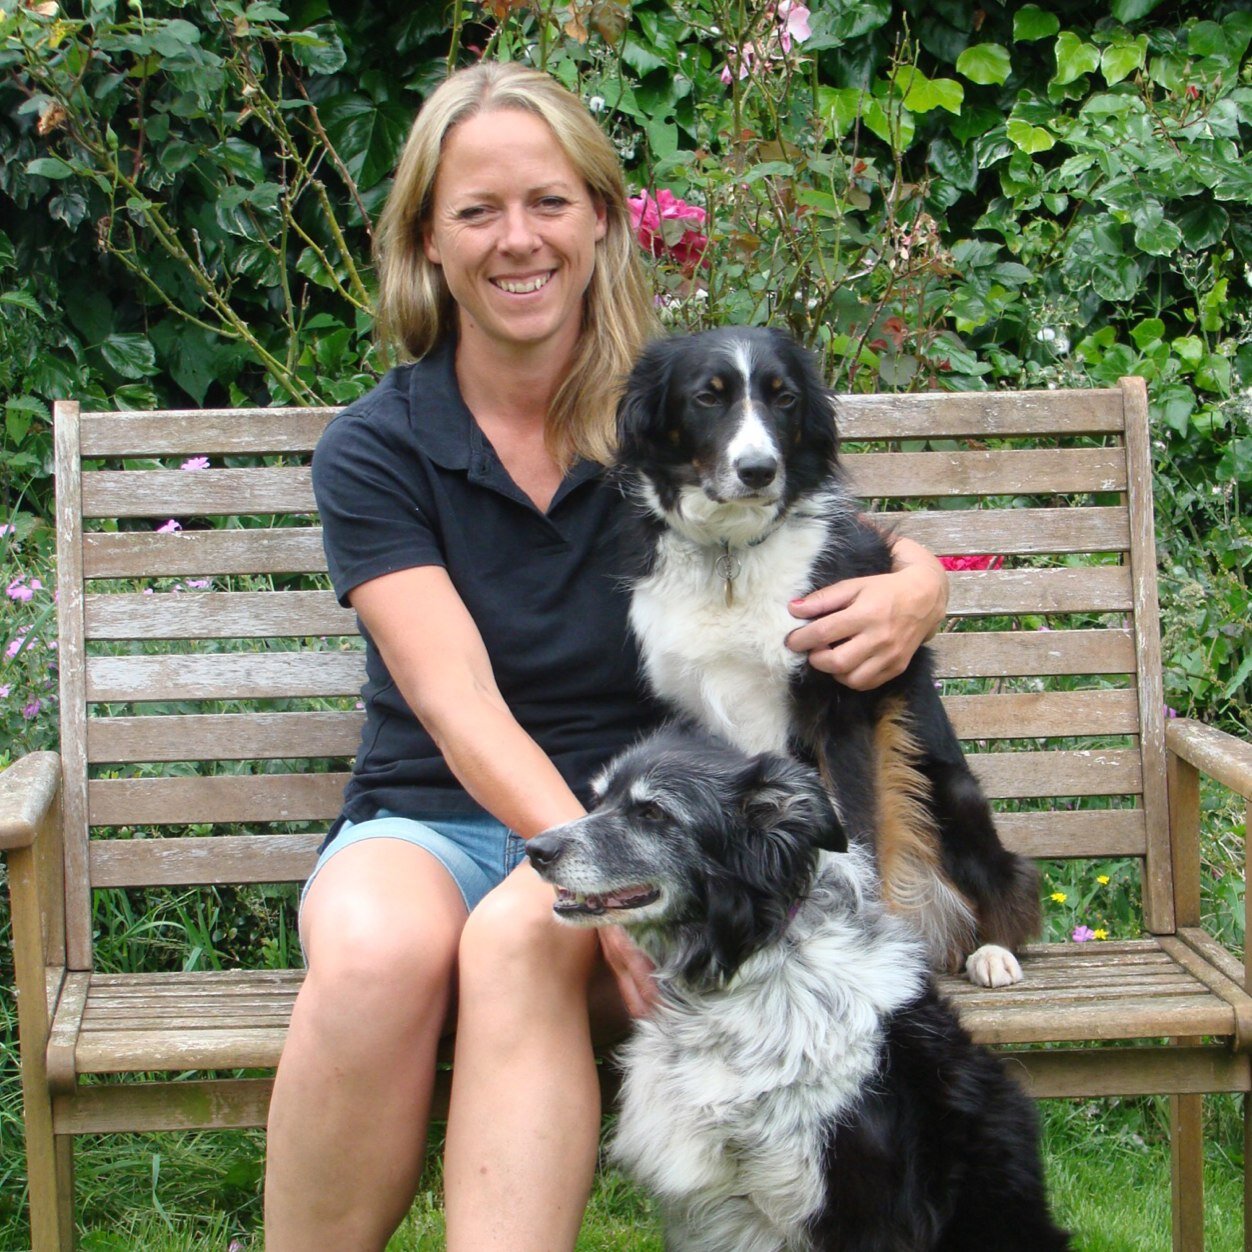 Dog training in Worcester, Worcestershire UK, puppy and adult dog training, dog agility, 1-2-1 behaviour consultations. Over 20 years expereince. APDT member